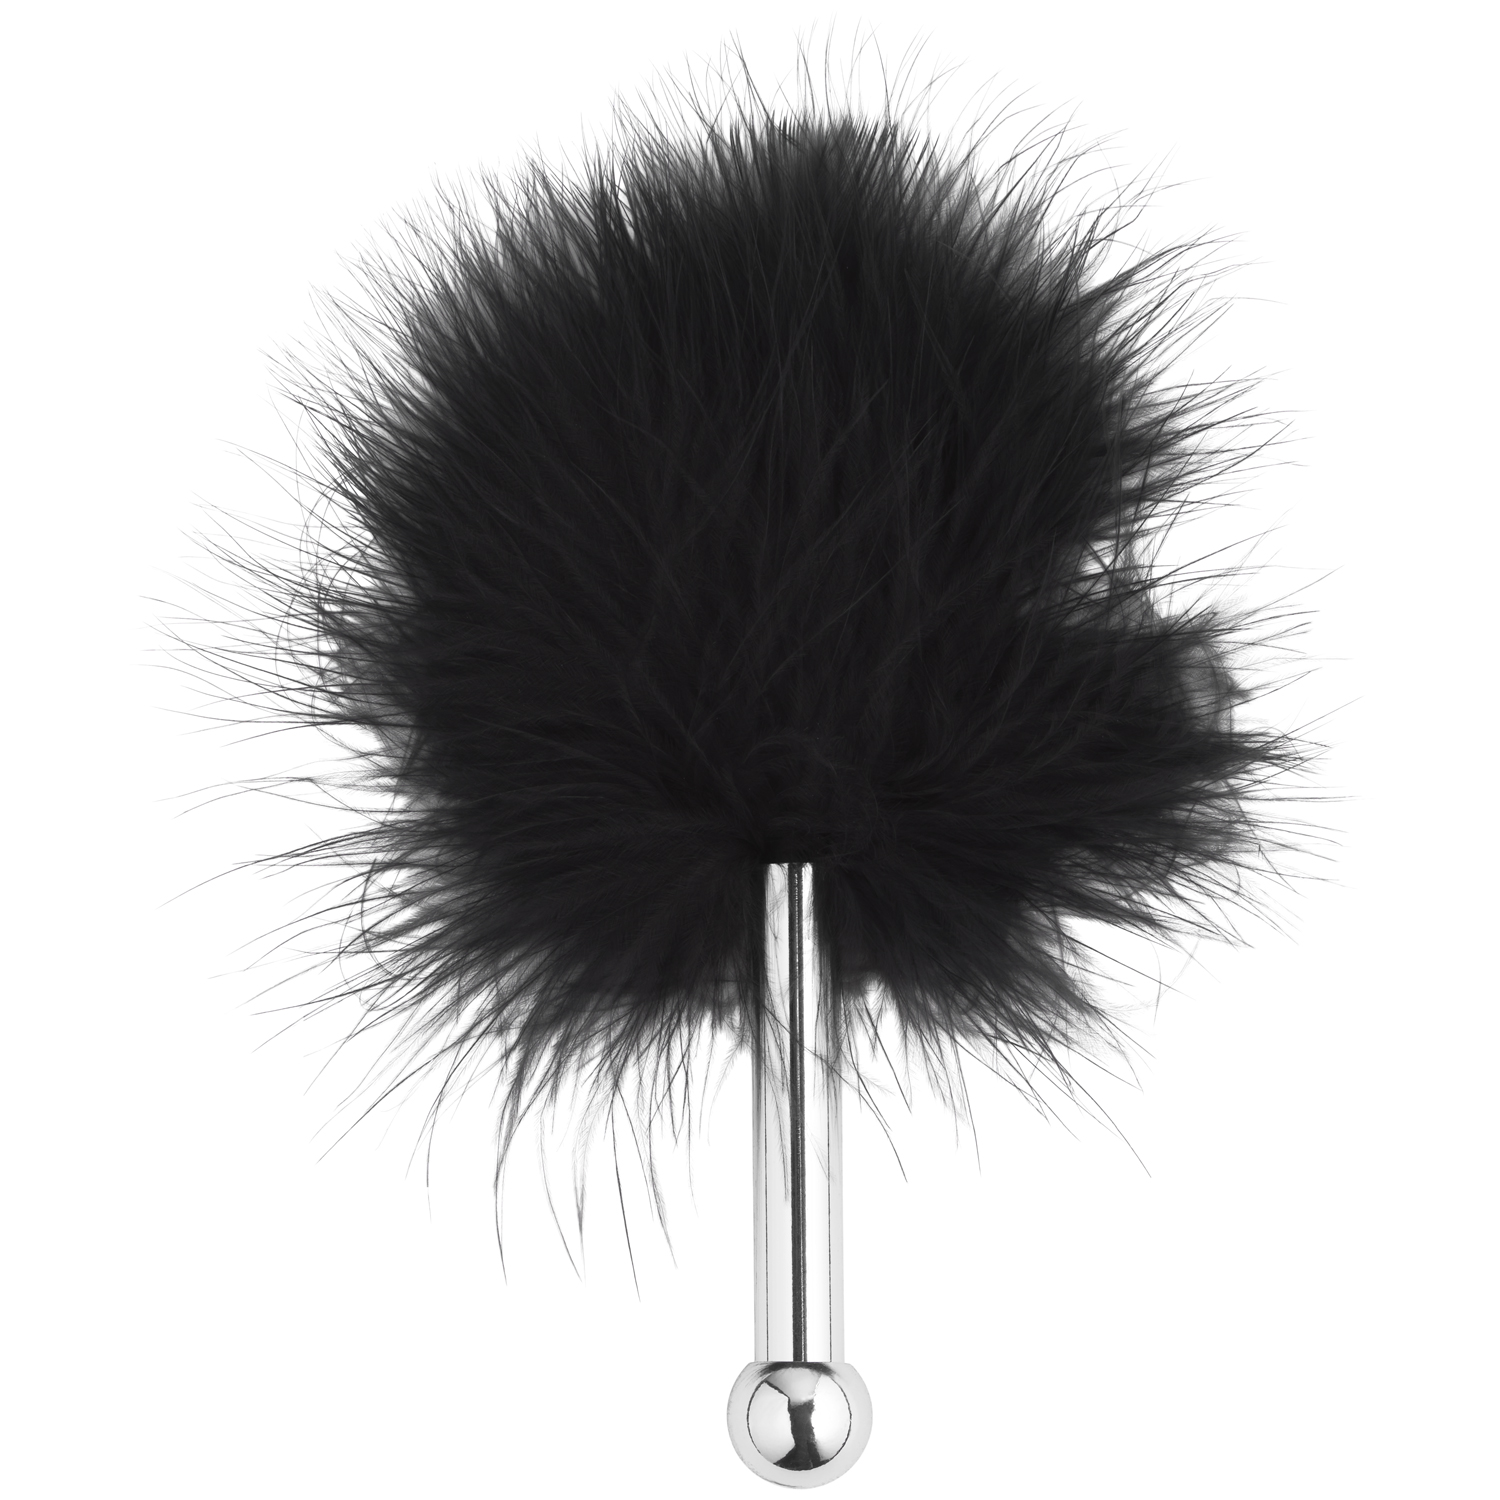 Sinful Tease Feather Silver Tickler      - Sort